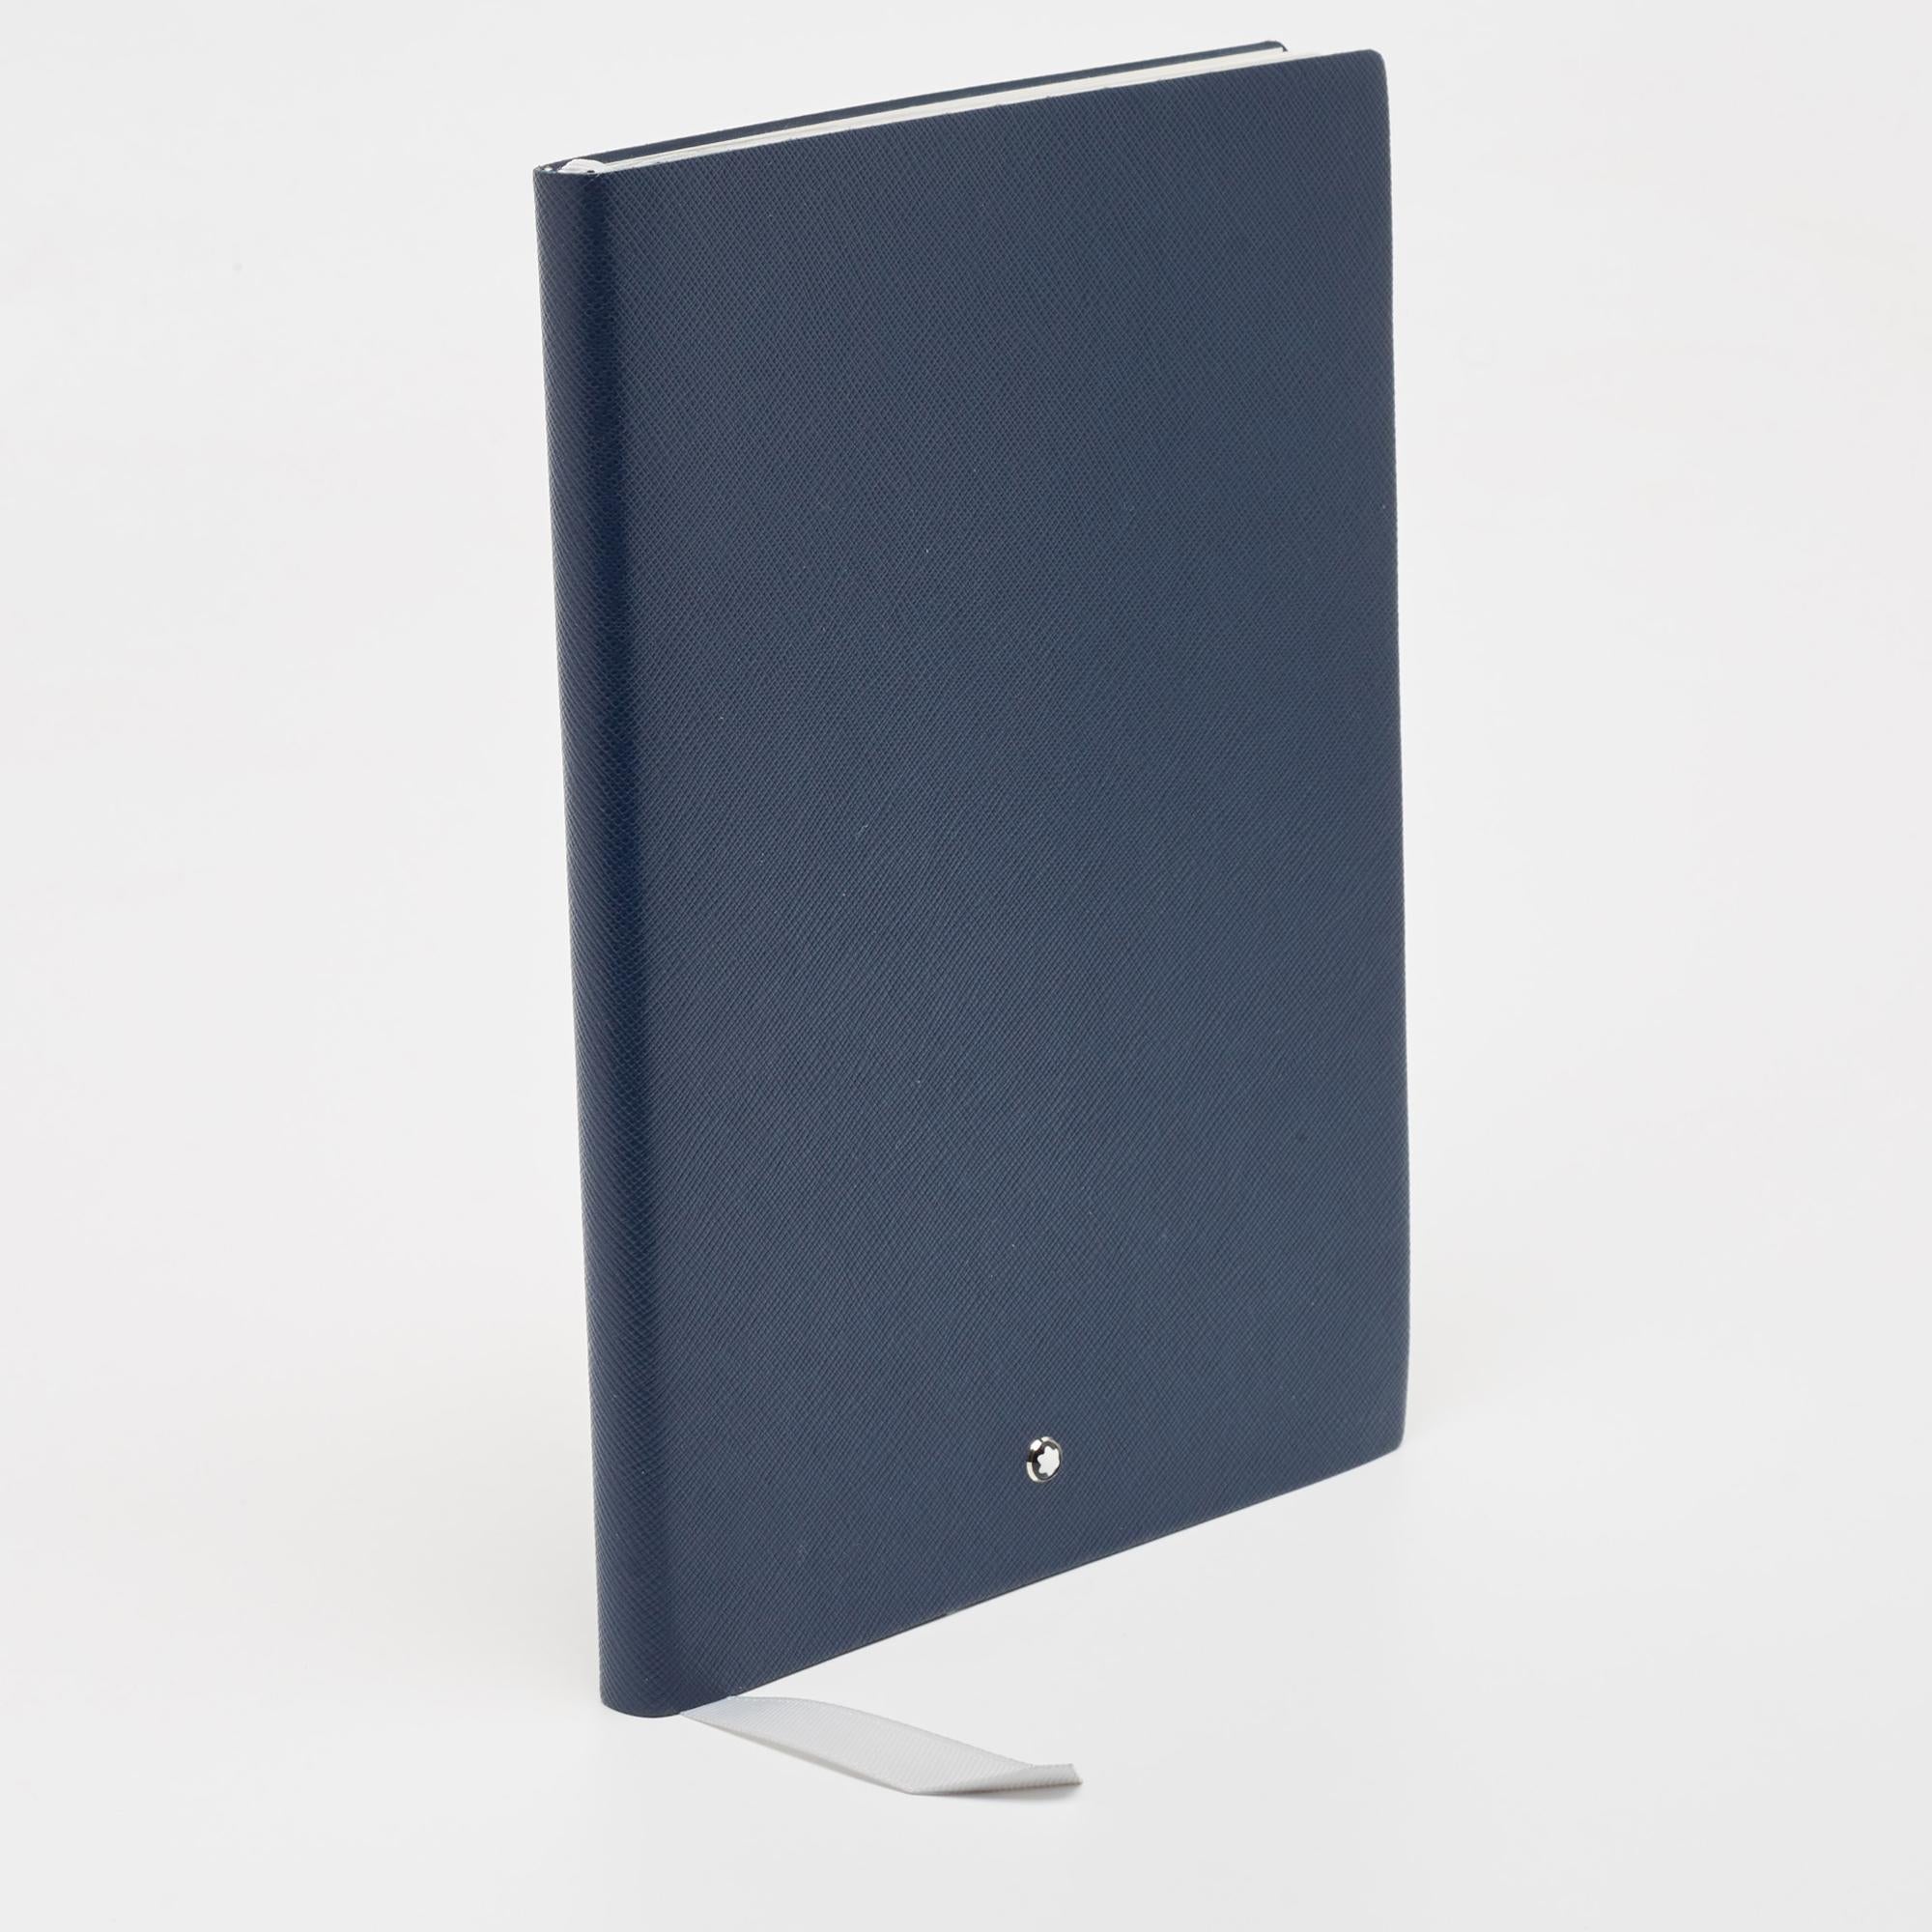 Montblanc Navy Blue Leather Fine Stationery Notebook In Excellent Condition For Sale In Dubai, Al Qouz 2